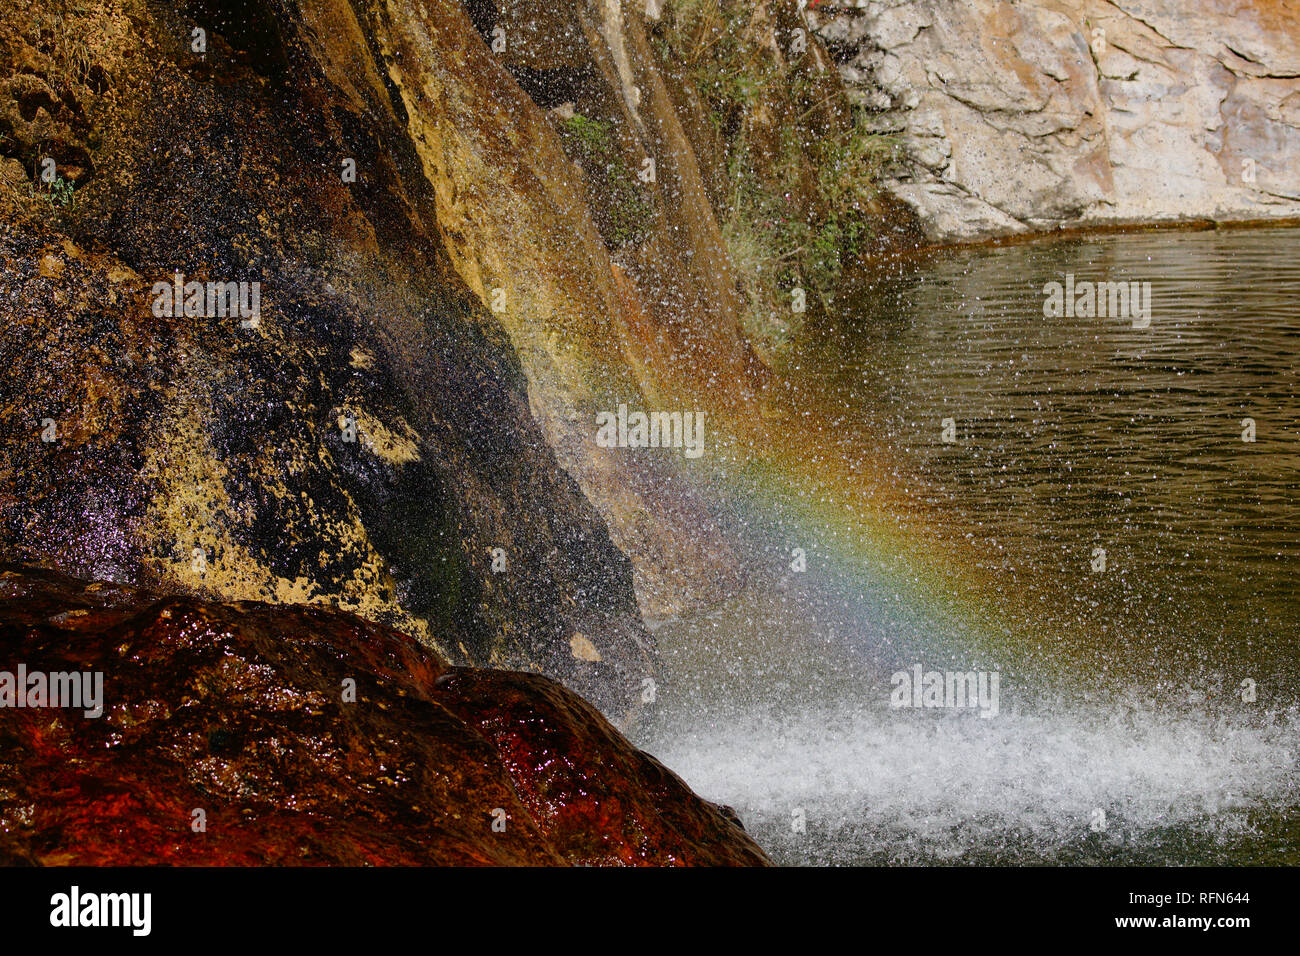 At the base of a waterfall a rainbow can be seen. Stock Photo